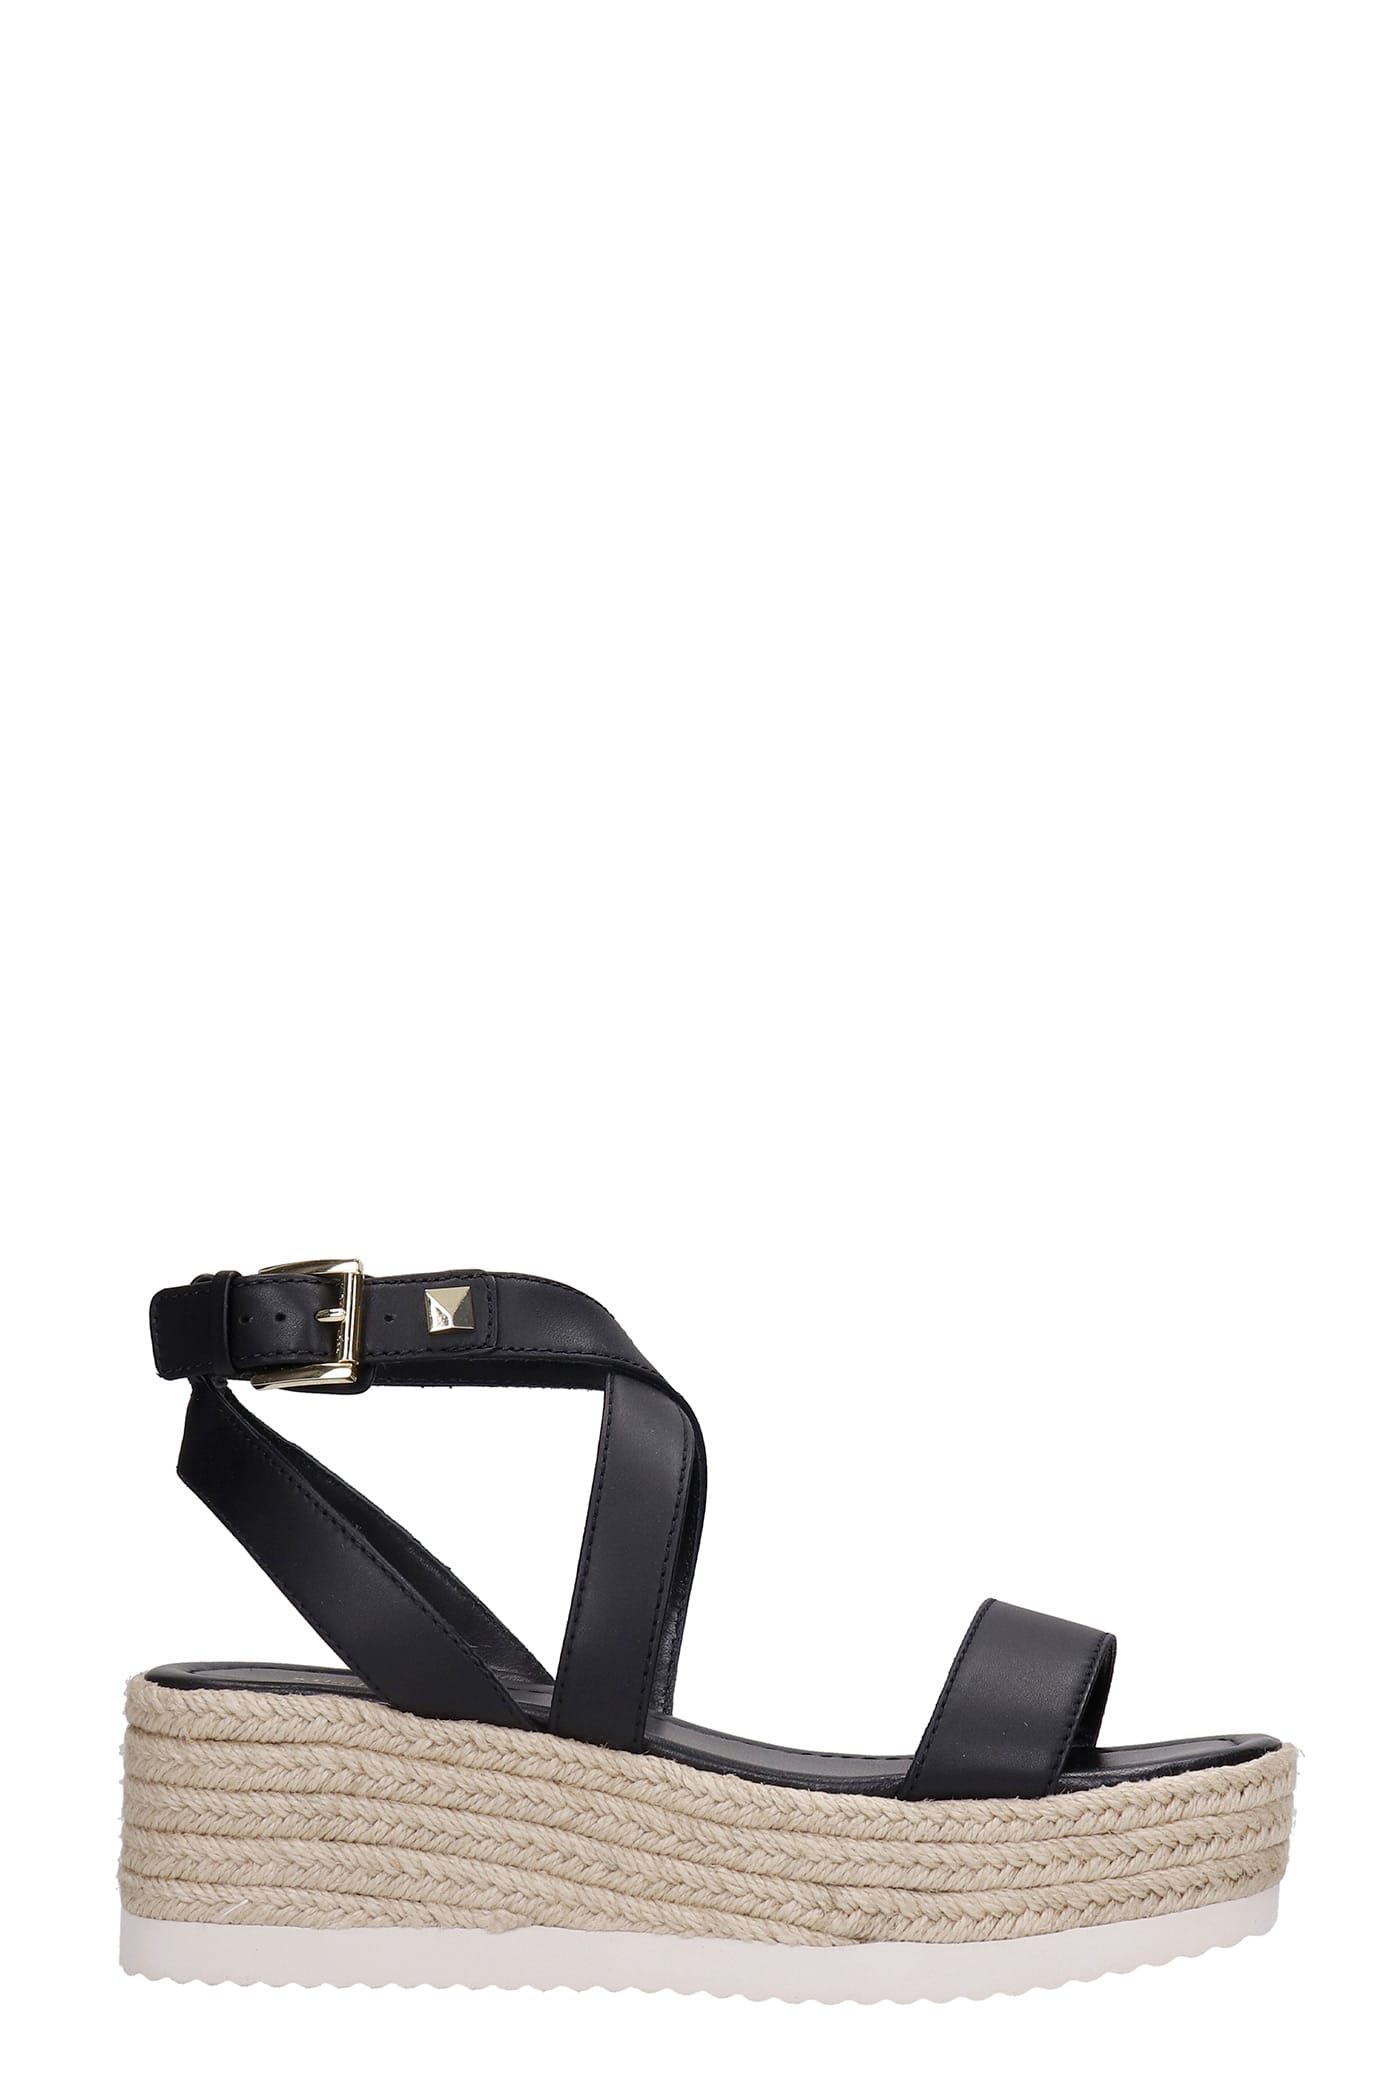 Michael Kors Lowry Wedges In Black Leather